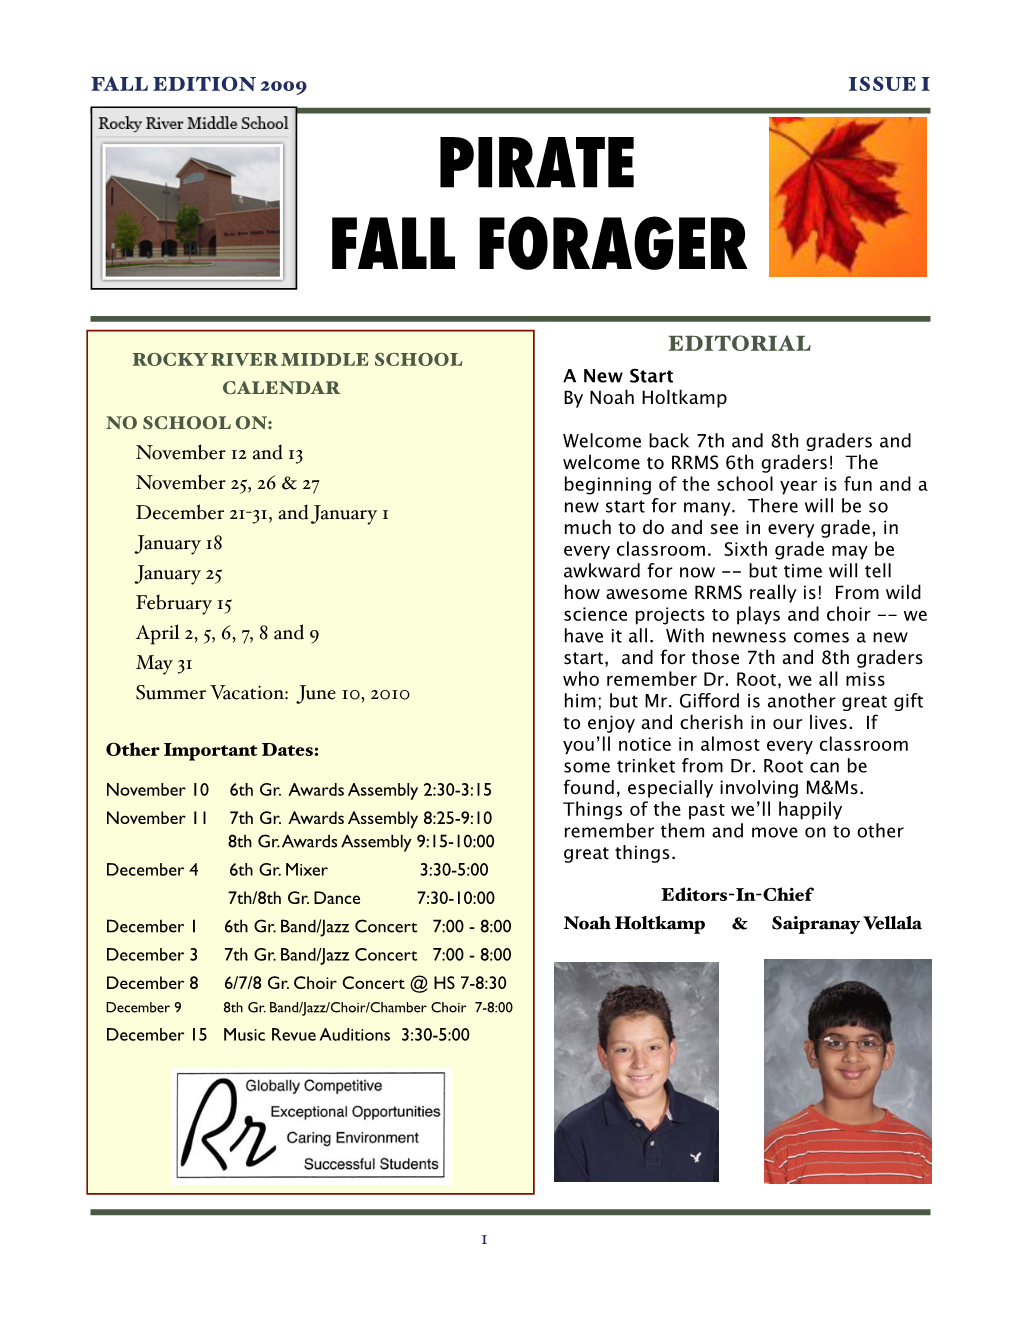 Fall Forager